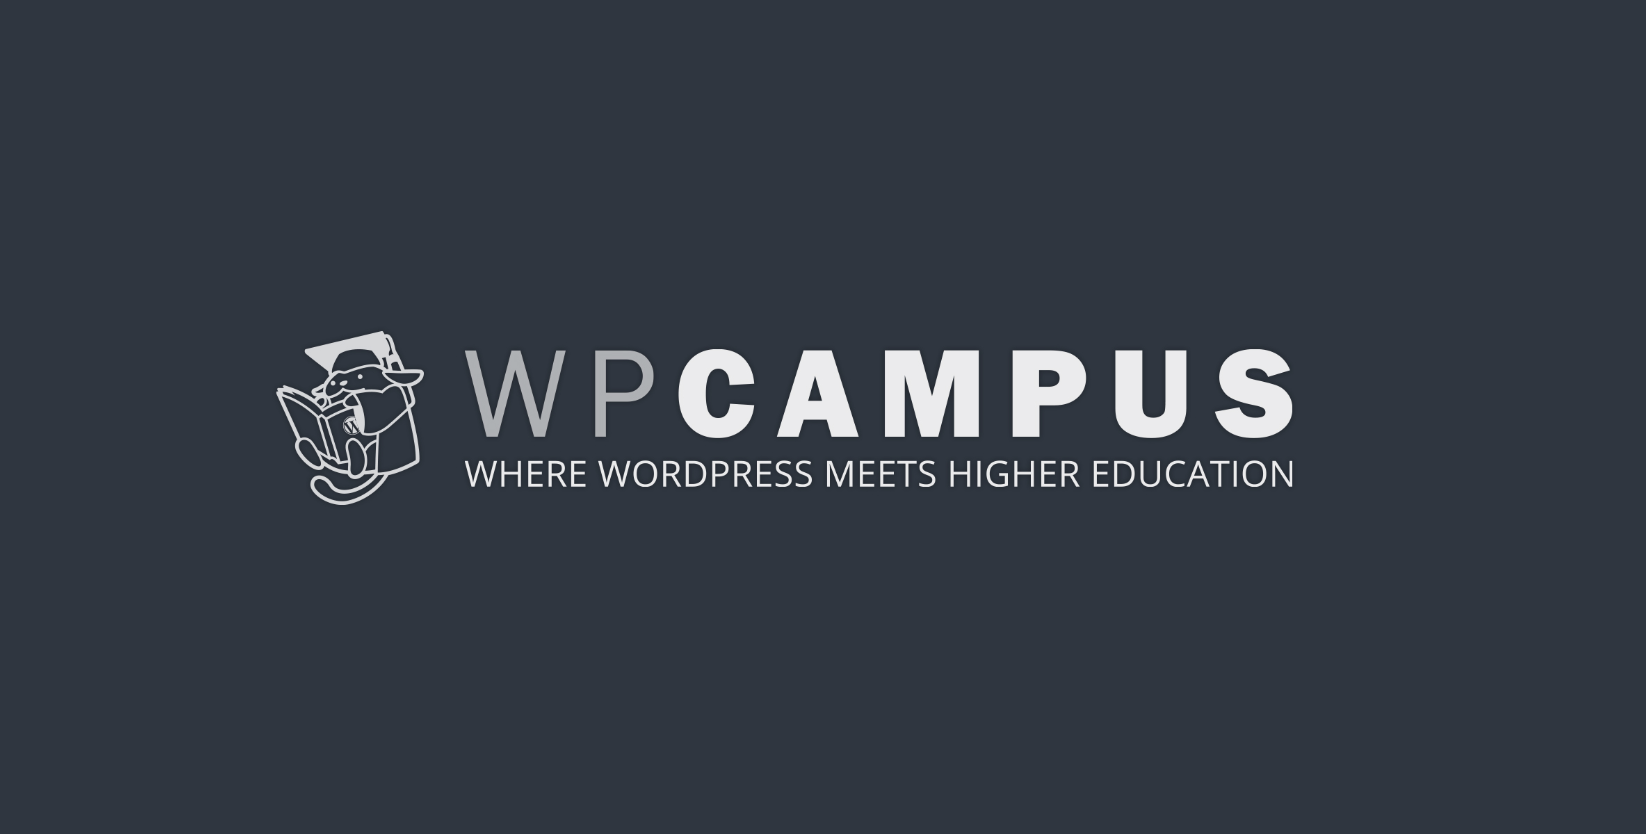 wpcampus-online-2020-conference-features-accessibility-and-higher-education-topics-july-29-30 WPCampus Online 2020 Conference特色可访问性和高等教育主题，7月29-30日